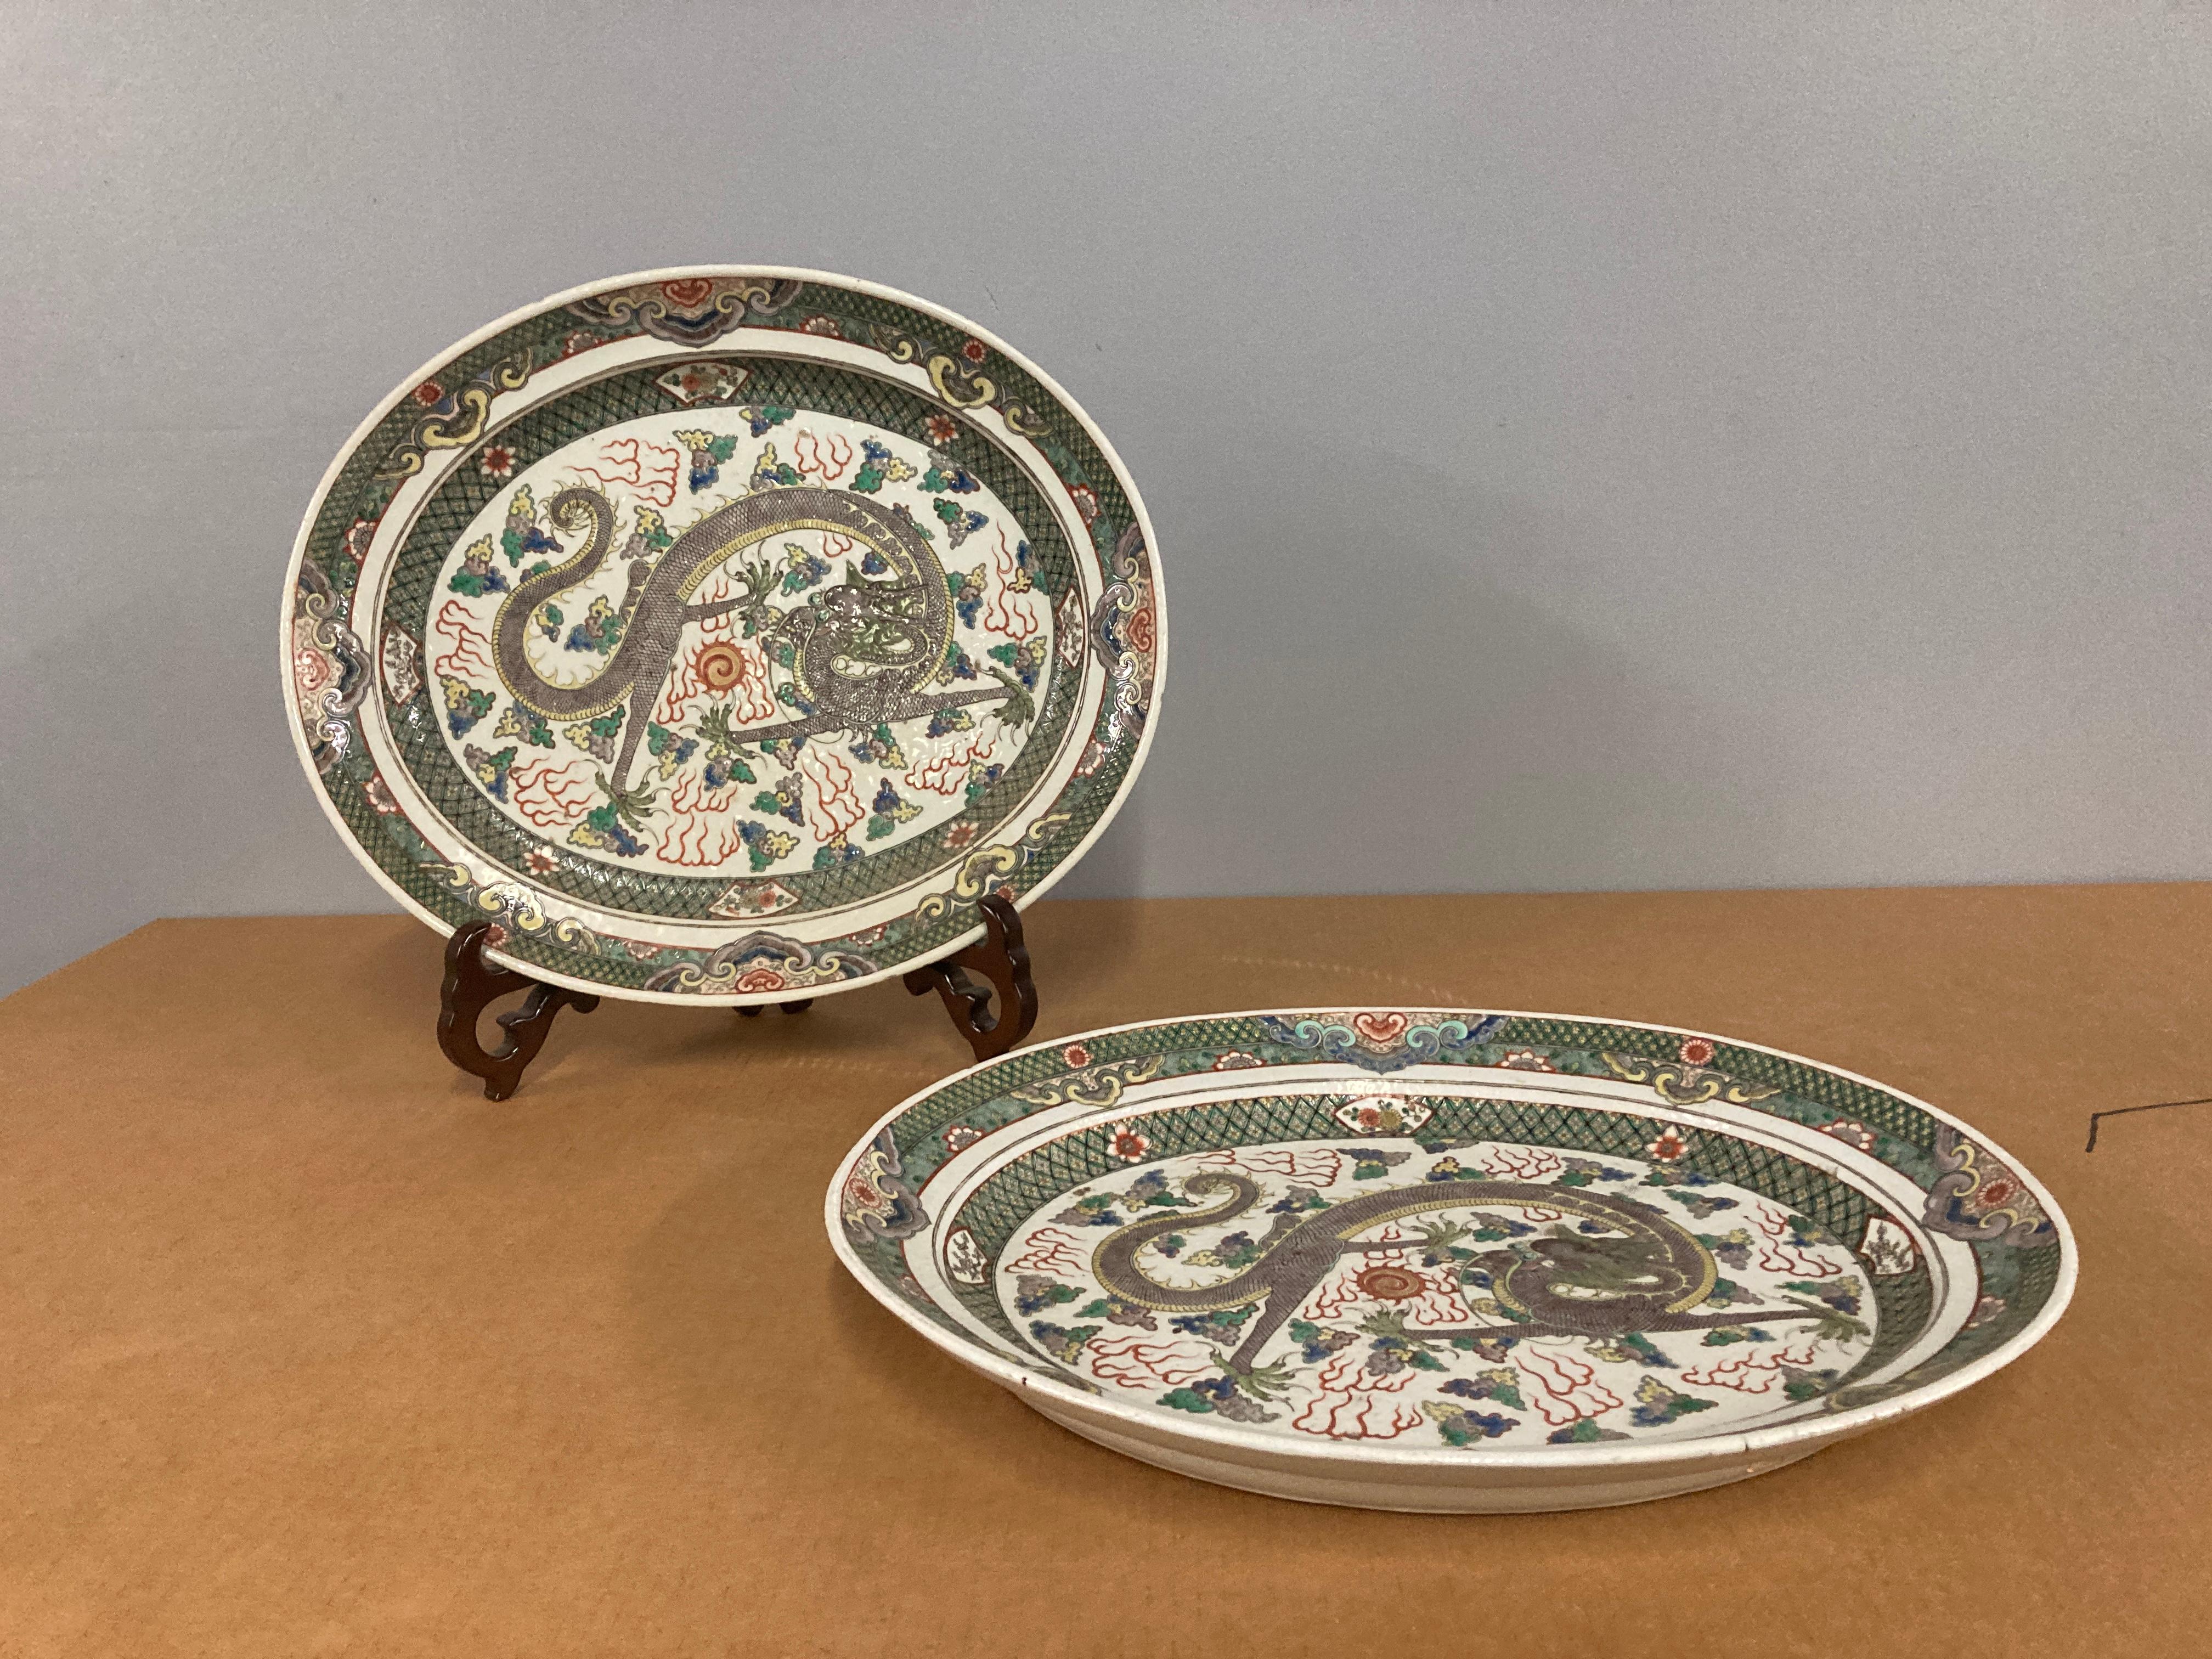 Glazed Large Pair of Chinese Export Famille Verte Platters from the Late 19th Century